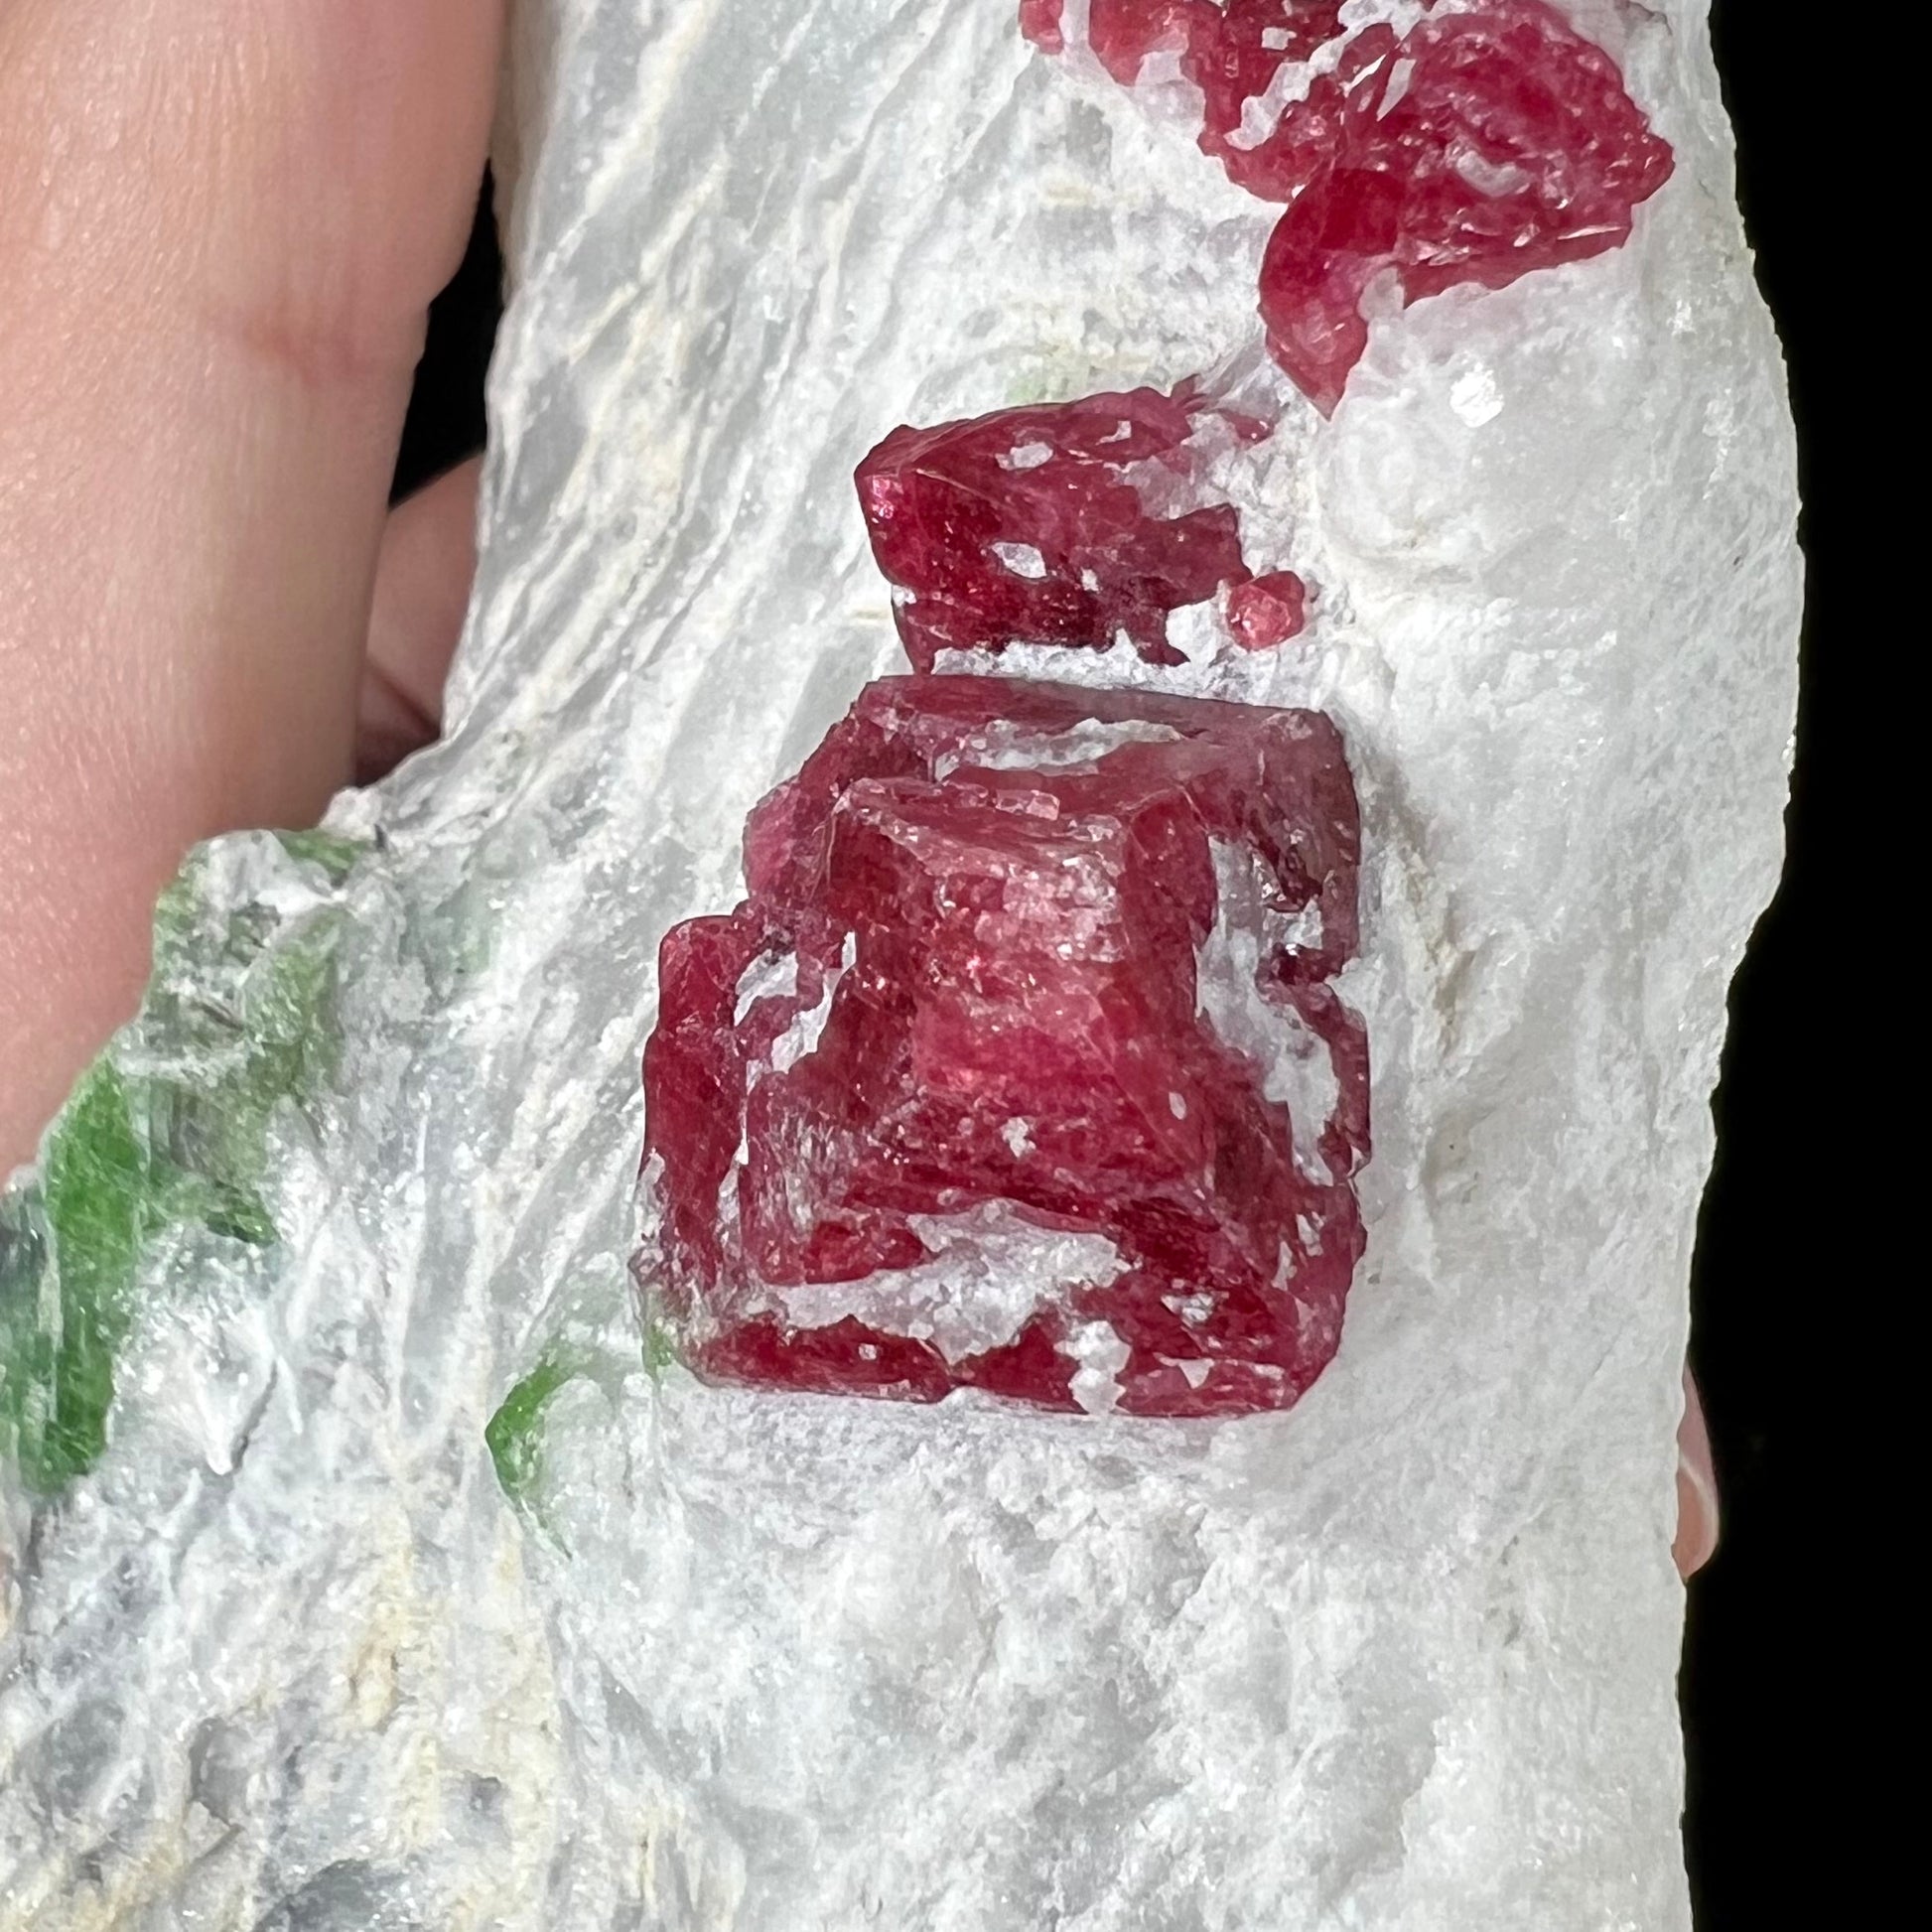 A red spinel crystal exhibiting the cubic crystal system in white calcite matrix from Luc Yen District, Vietnam.